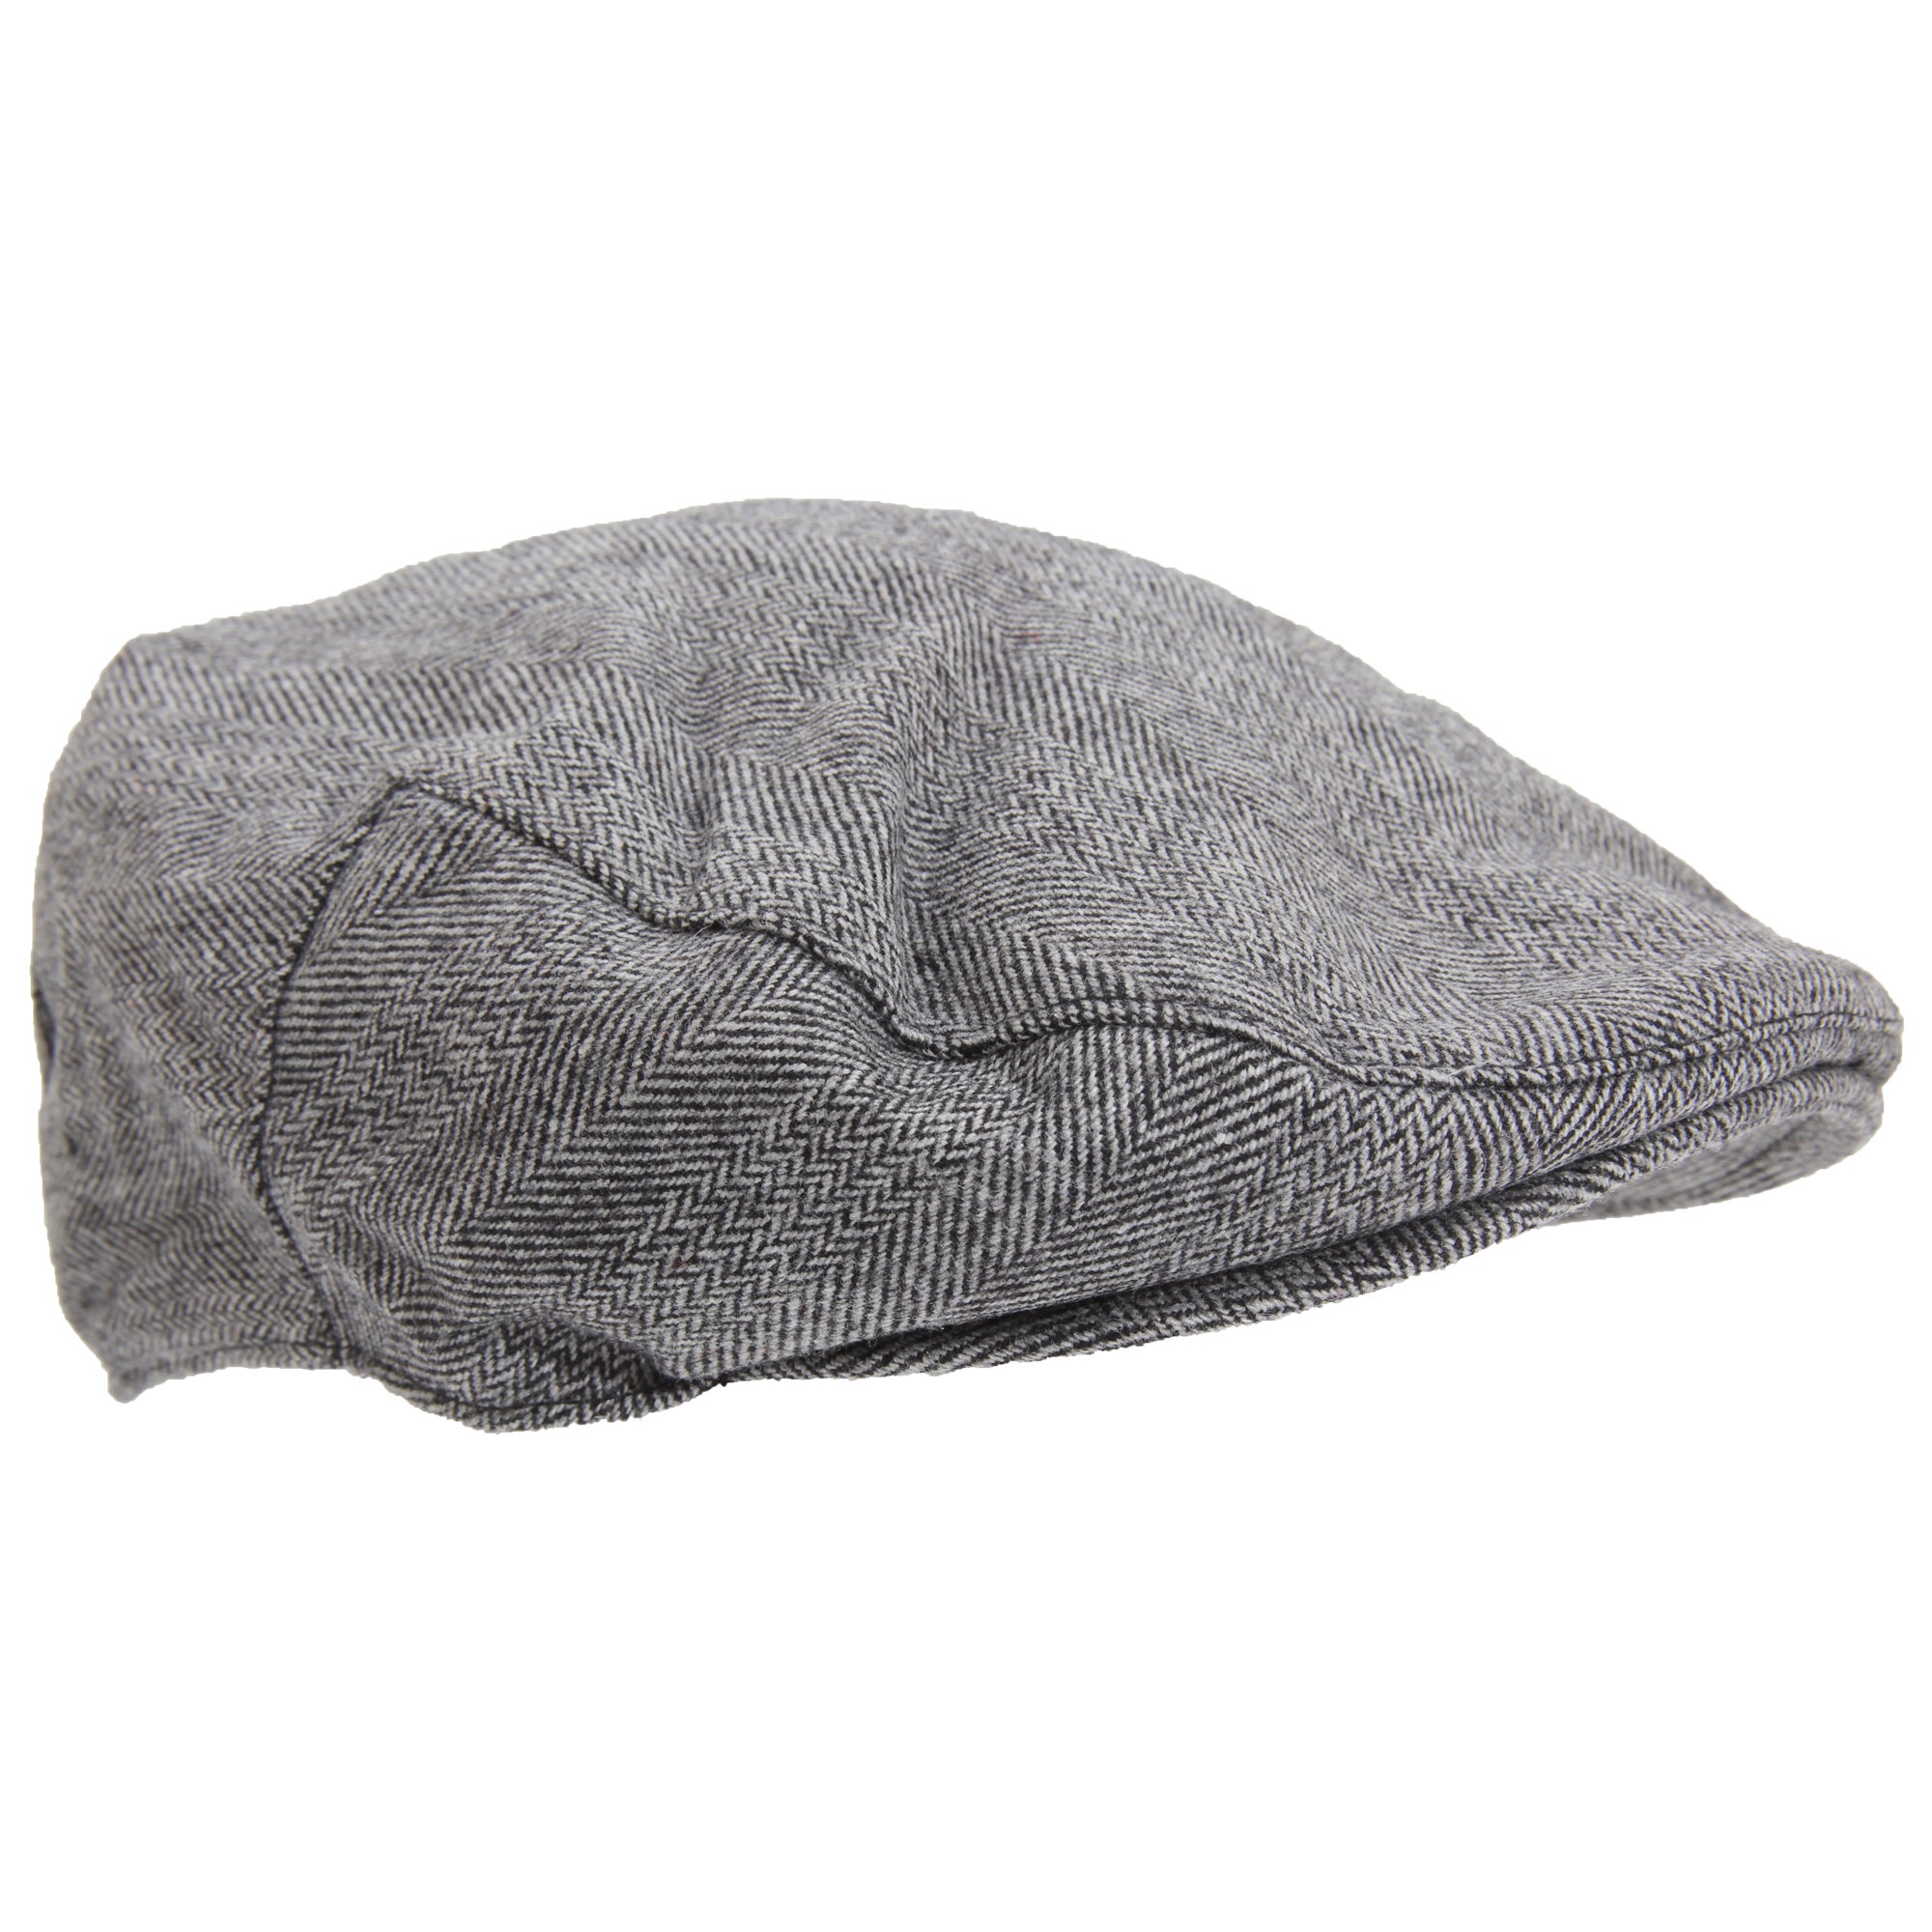 Mens Traditional Lined Flat Cap